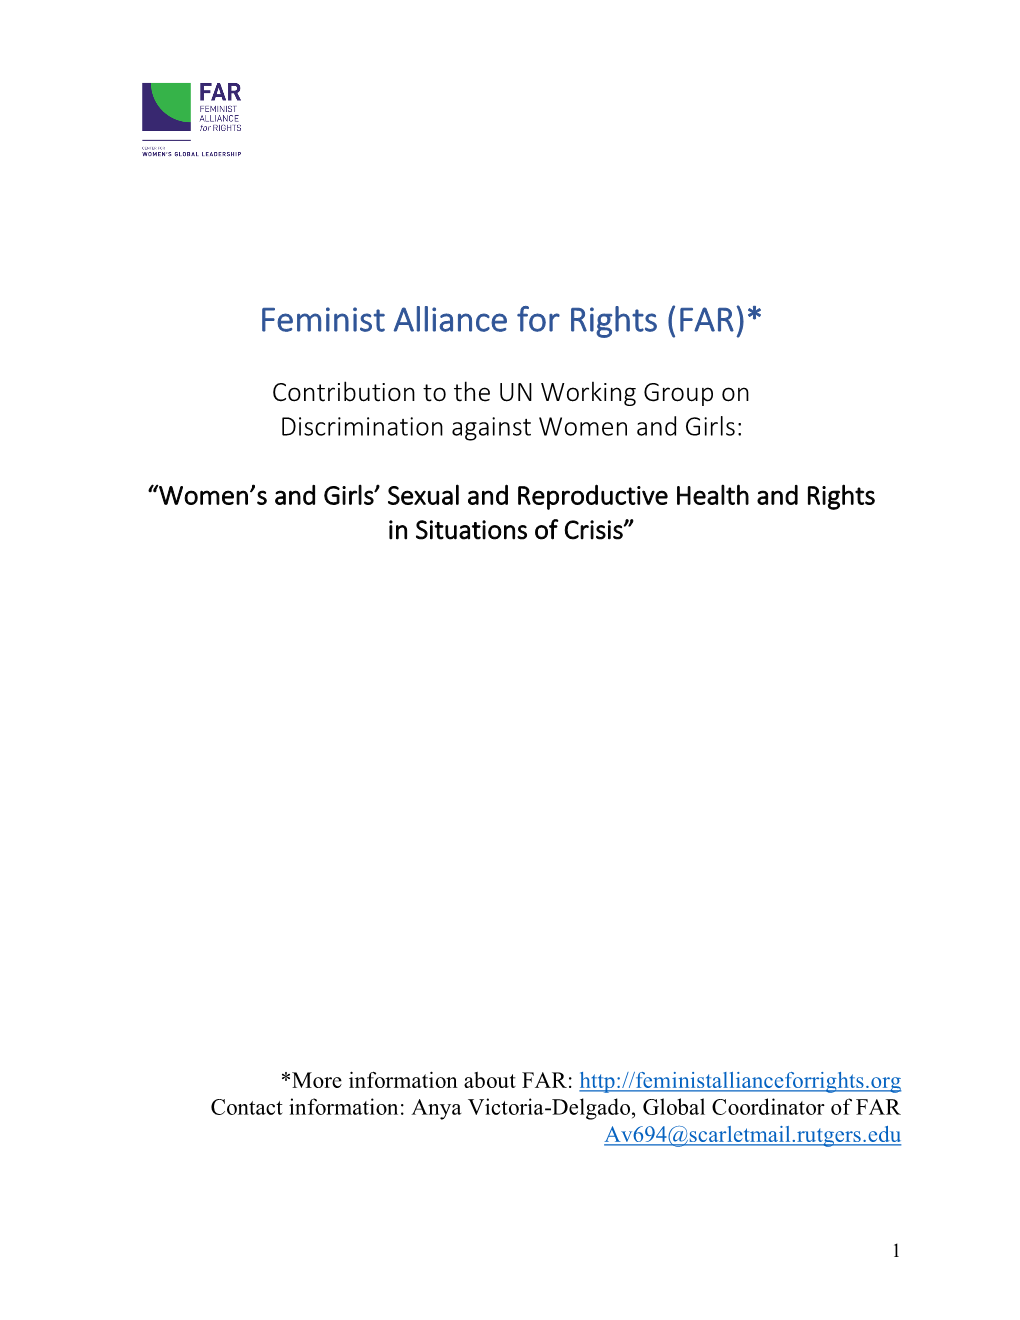 Feminists Alliance for Rights